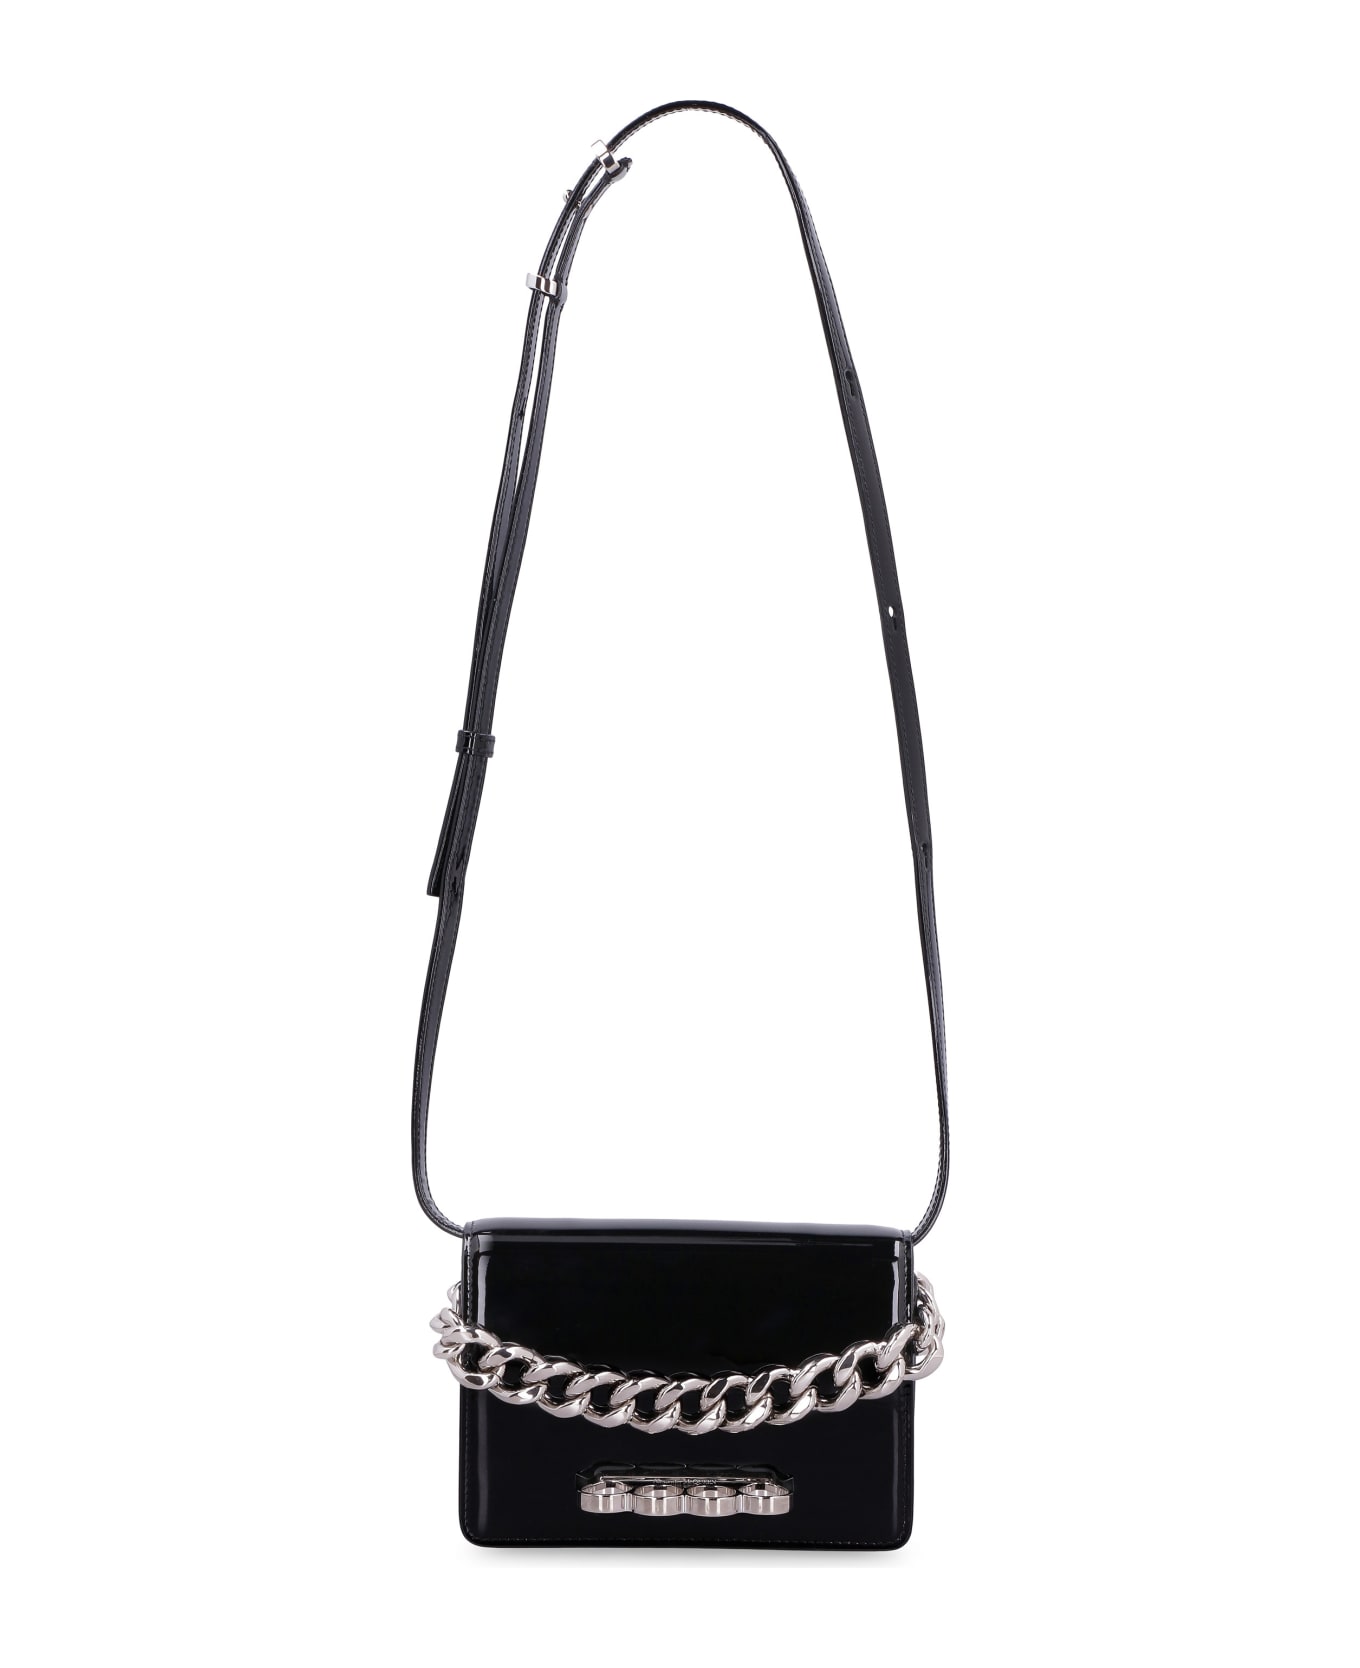 Alexander McQueen The Four Ring Mini Patent Leather Bag - Black